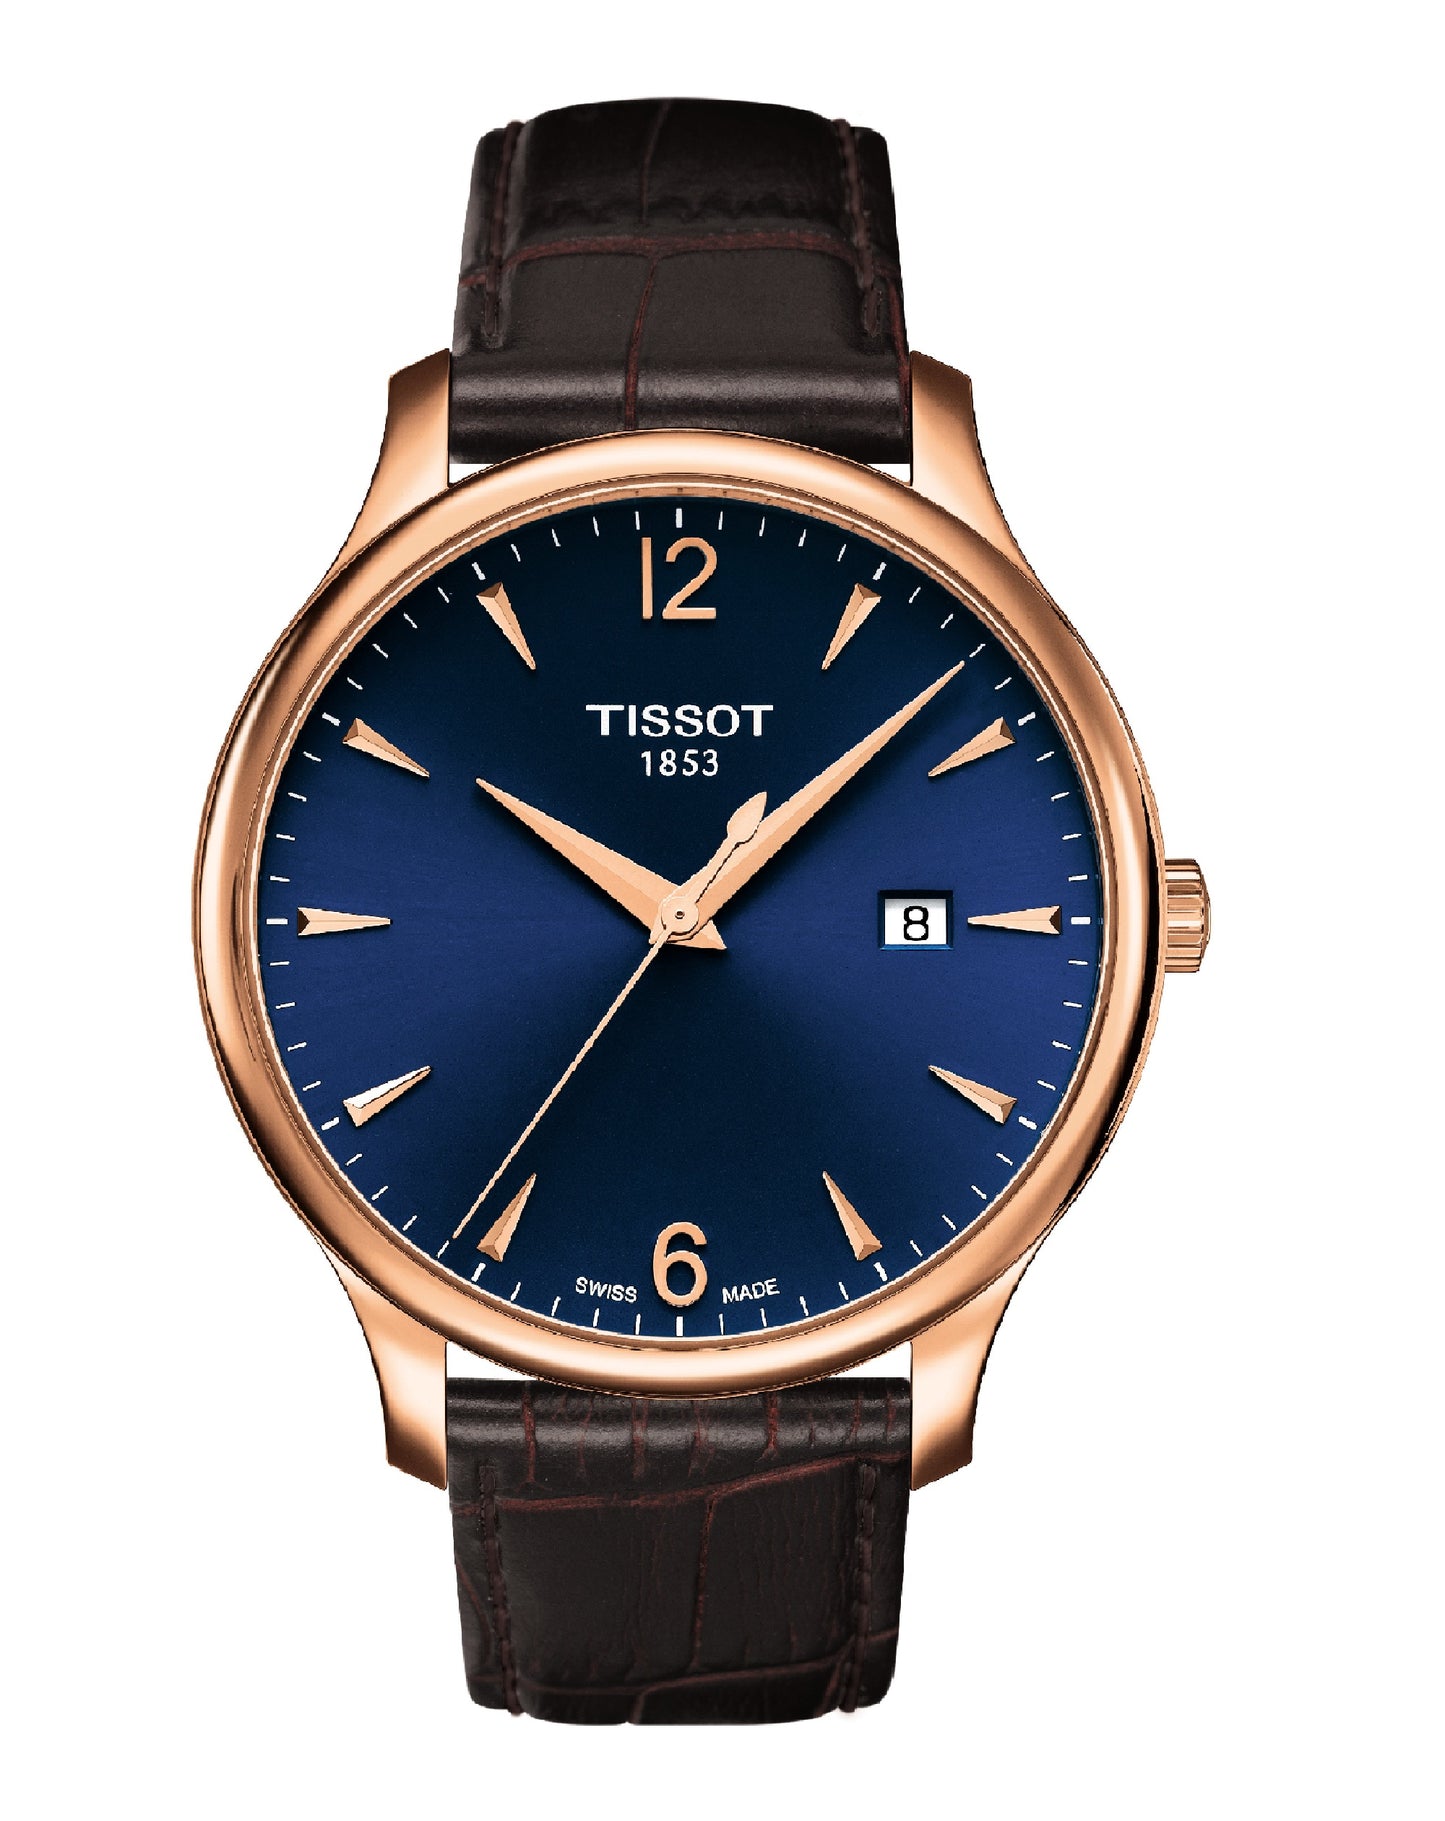 Tissot T063.610.36.047.00 Tissot Tradition BLUE Dial BROWN Leather Strap Watch